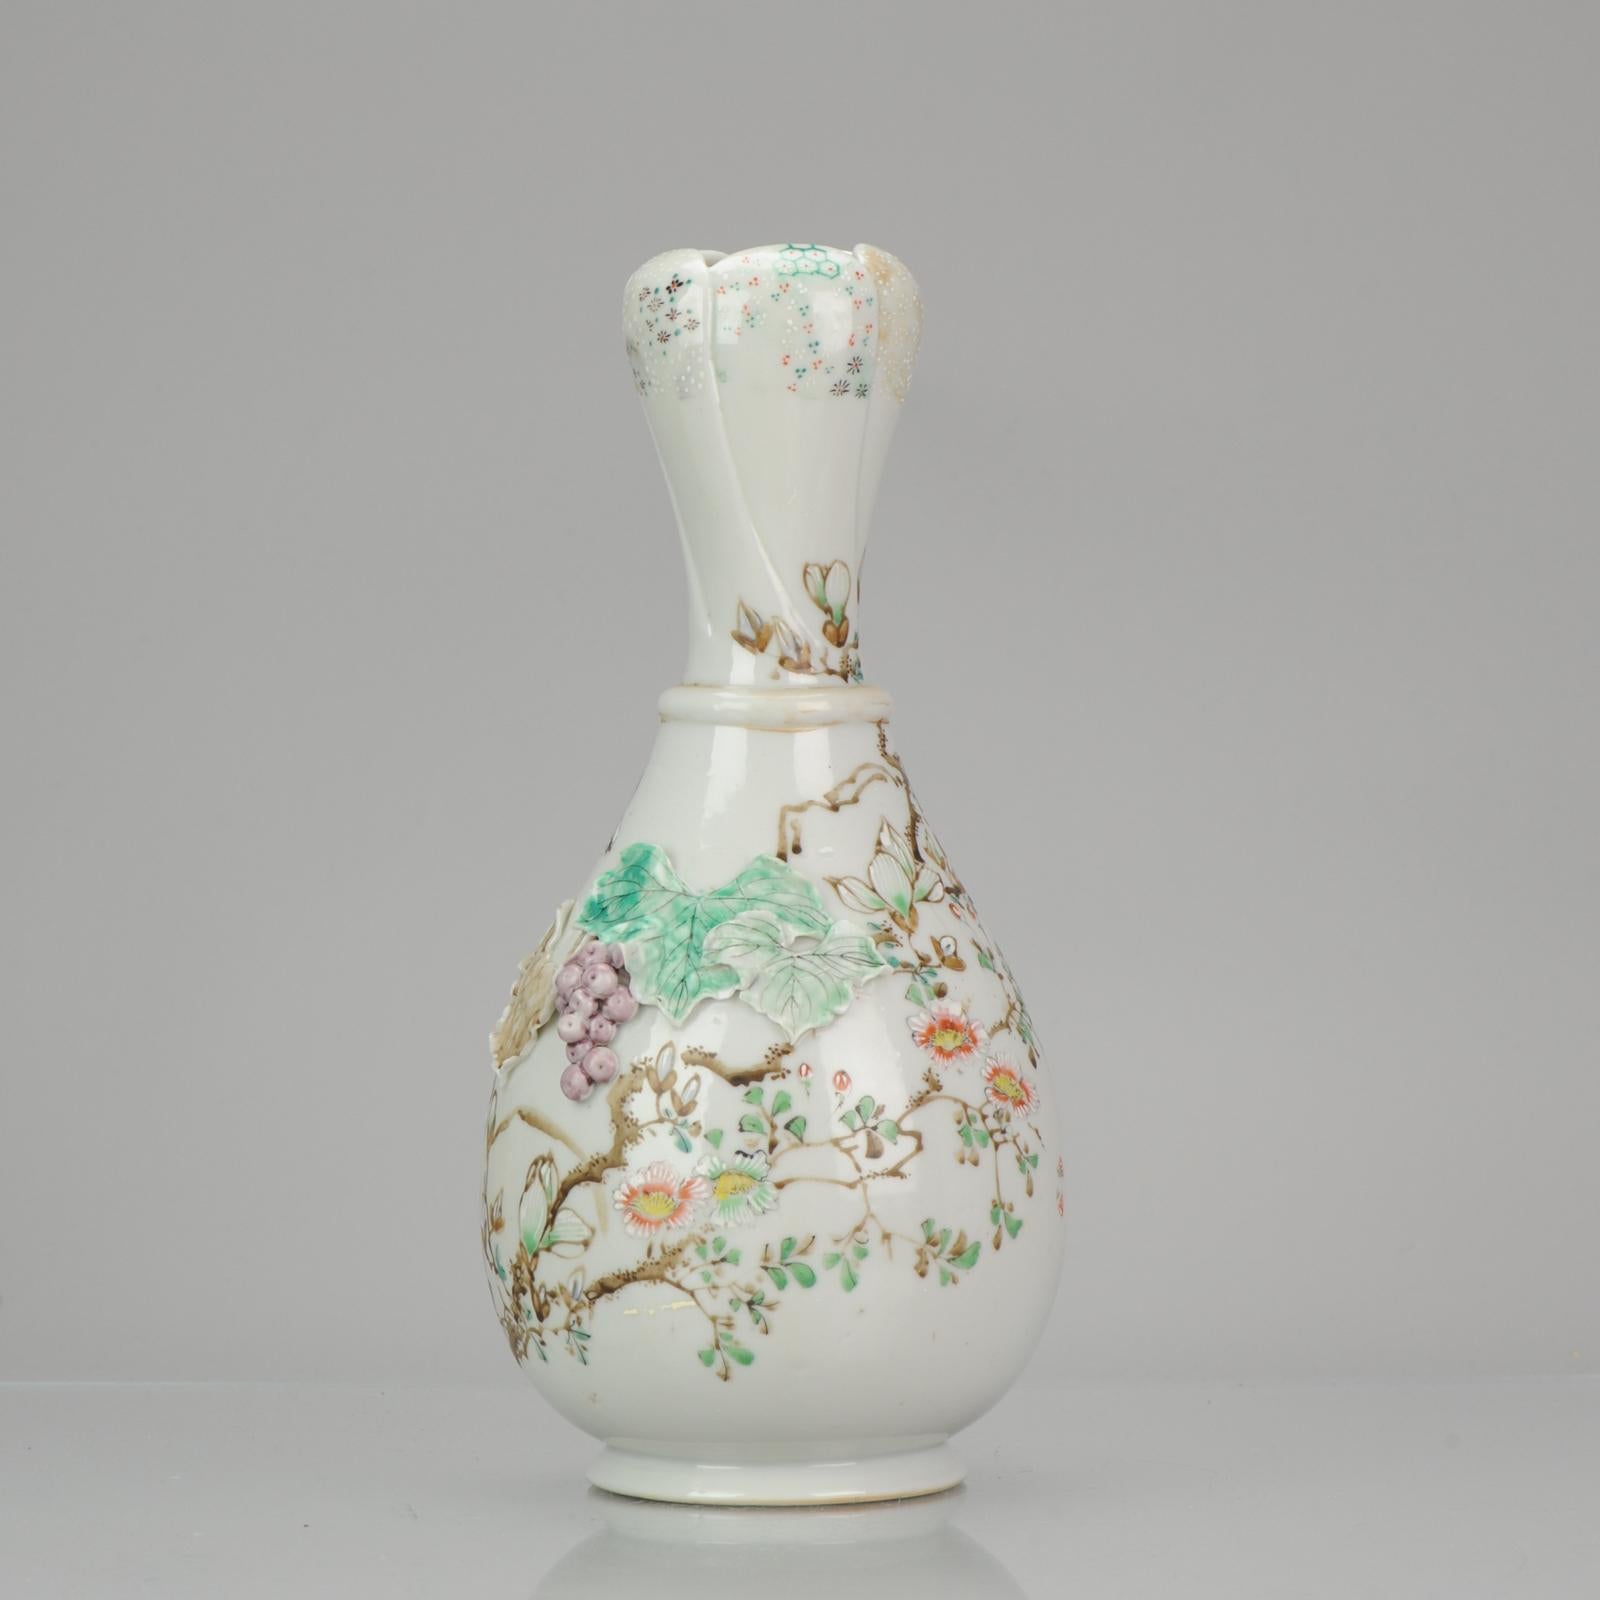 Great 19C Japanese Porcelain Vase Relief Grapes Leaves Flowers and Bird For Sale 1